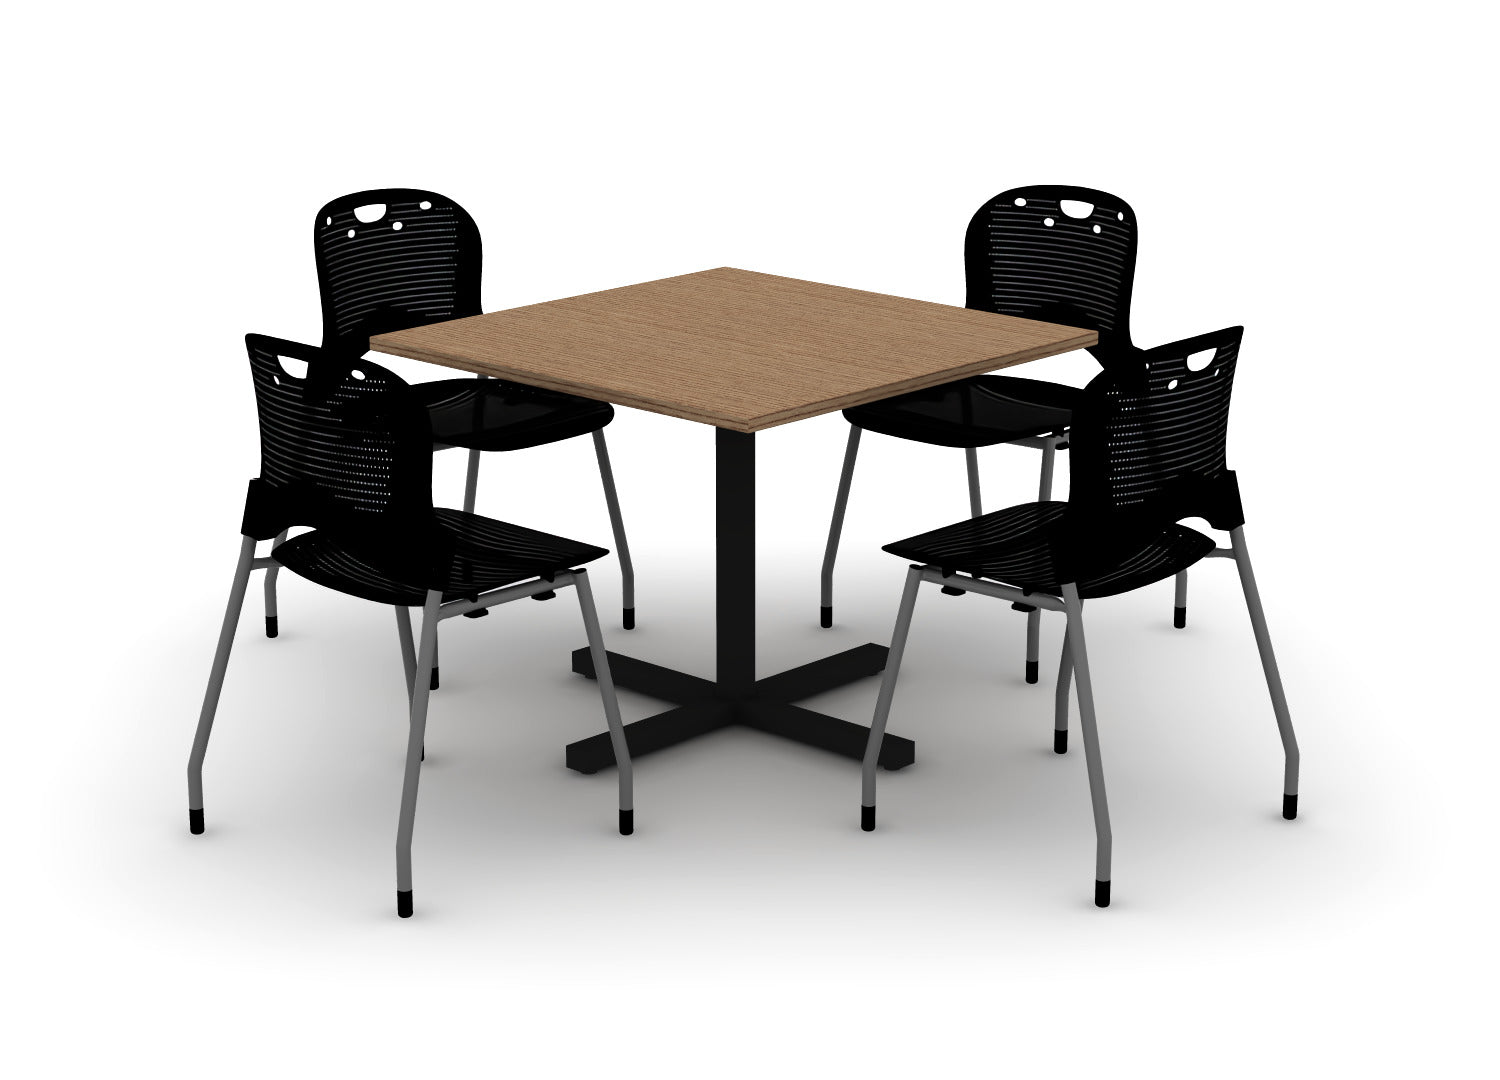 36" x 36" Square Table with Chairs